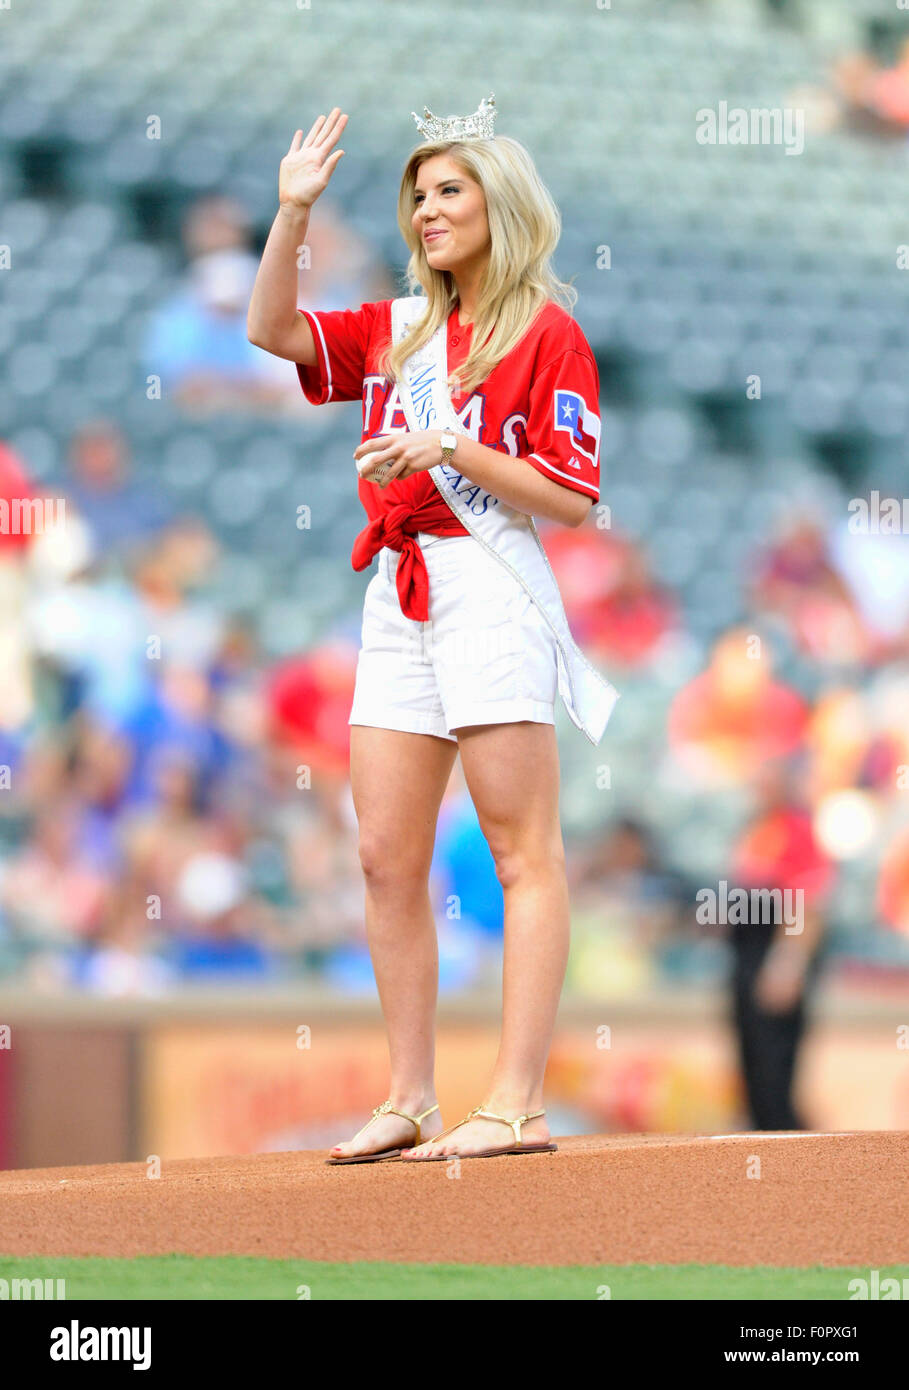 AUG 18, 2015: Miss Texas Shannon Sanderford throws out the first pitch before an MLB game between the Seattle Mariners and the Texas Rangers at Globe Life Park in Arlington, TX Seattle defeated Texas 3-2 Albert Pena/CSM Stock Photo